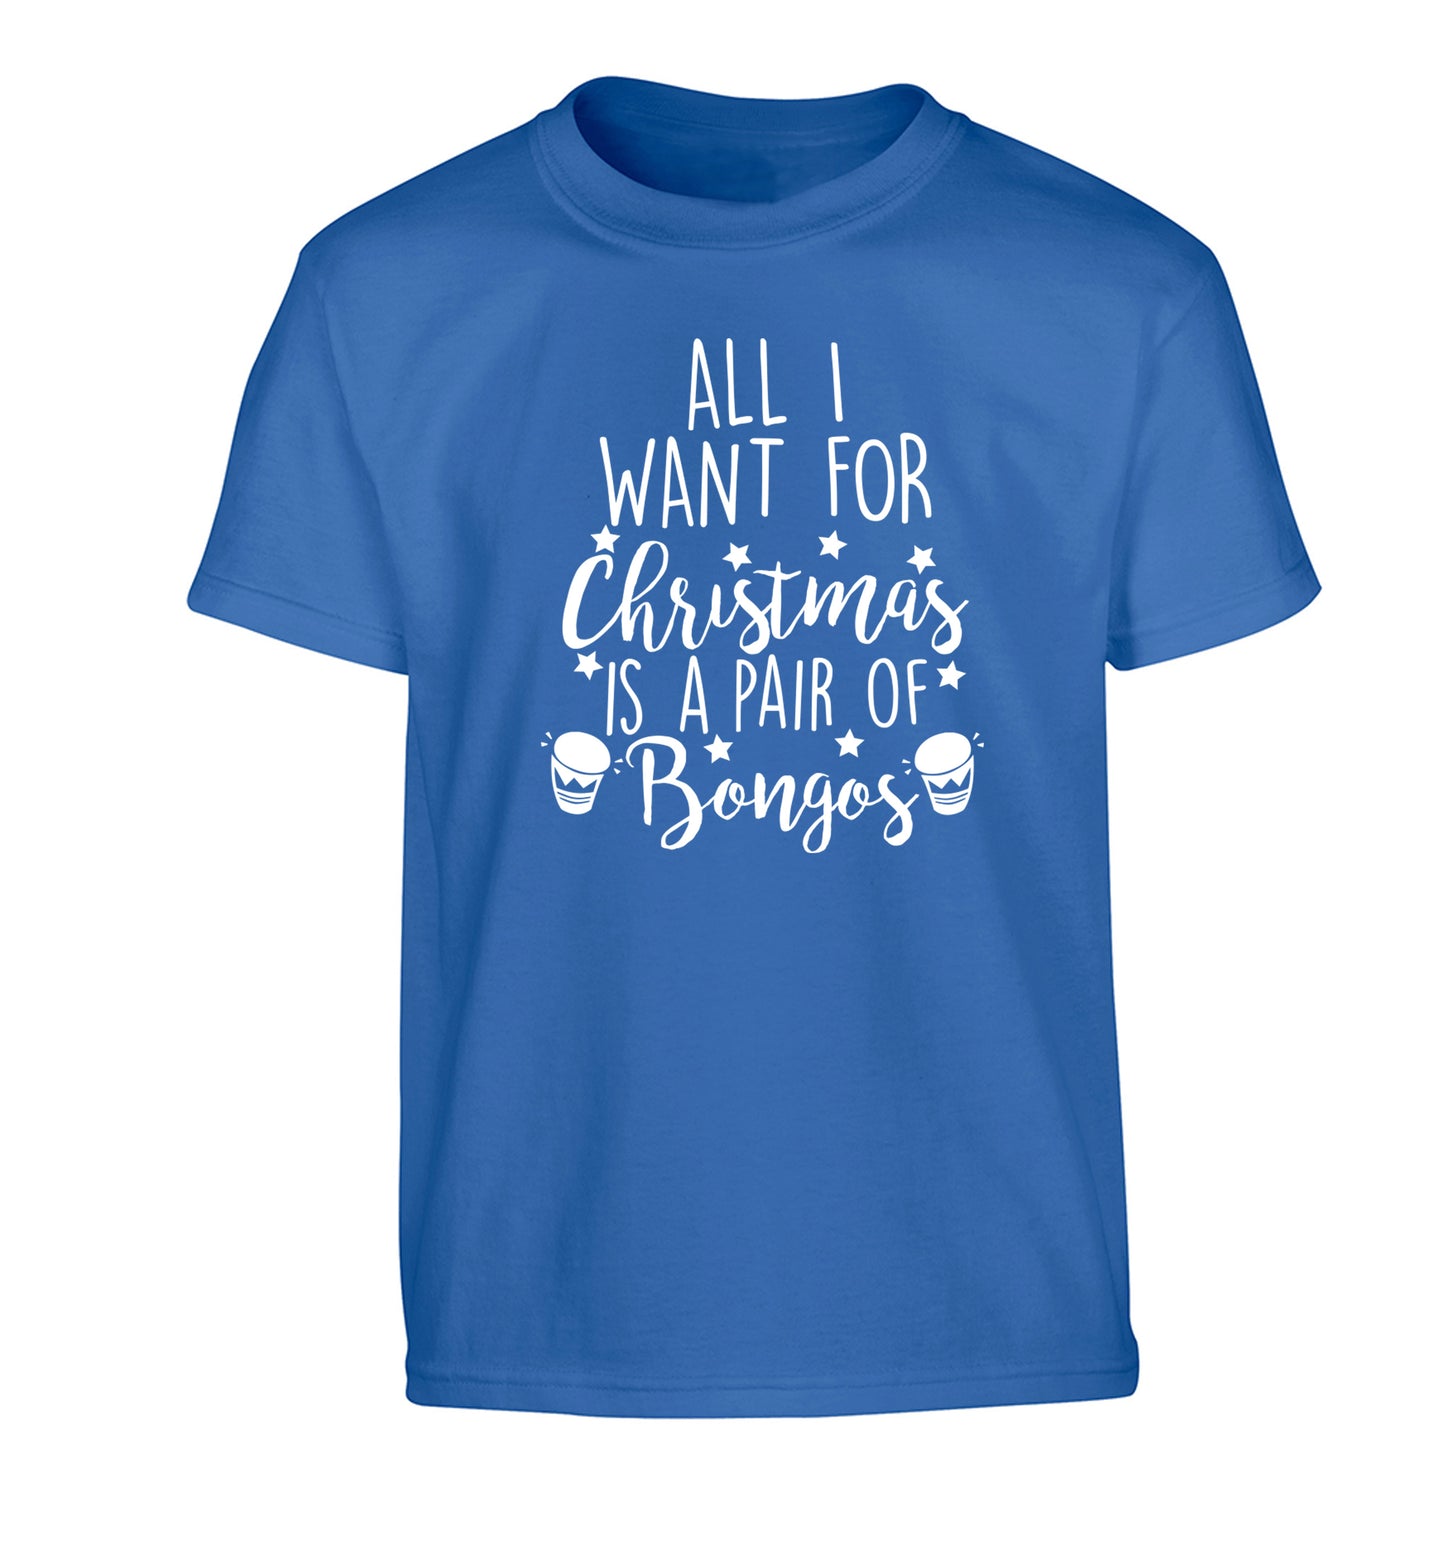 All I want for Christmas is a pair of bongos! Children's blue Tshirt 12-14 Years